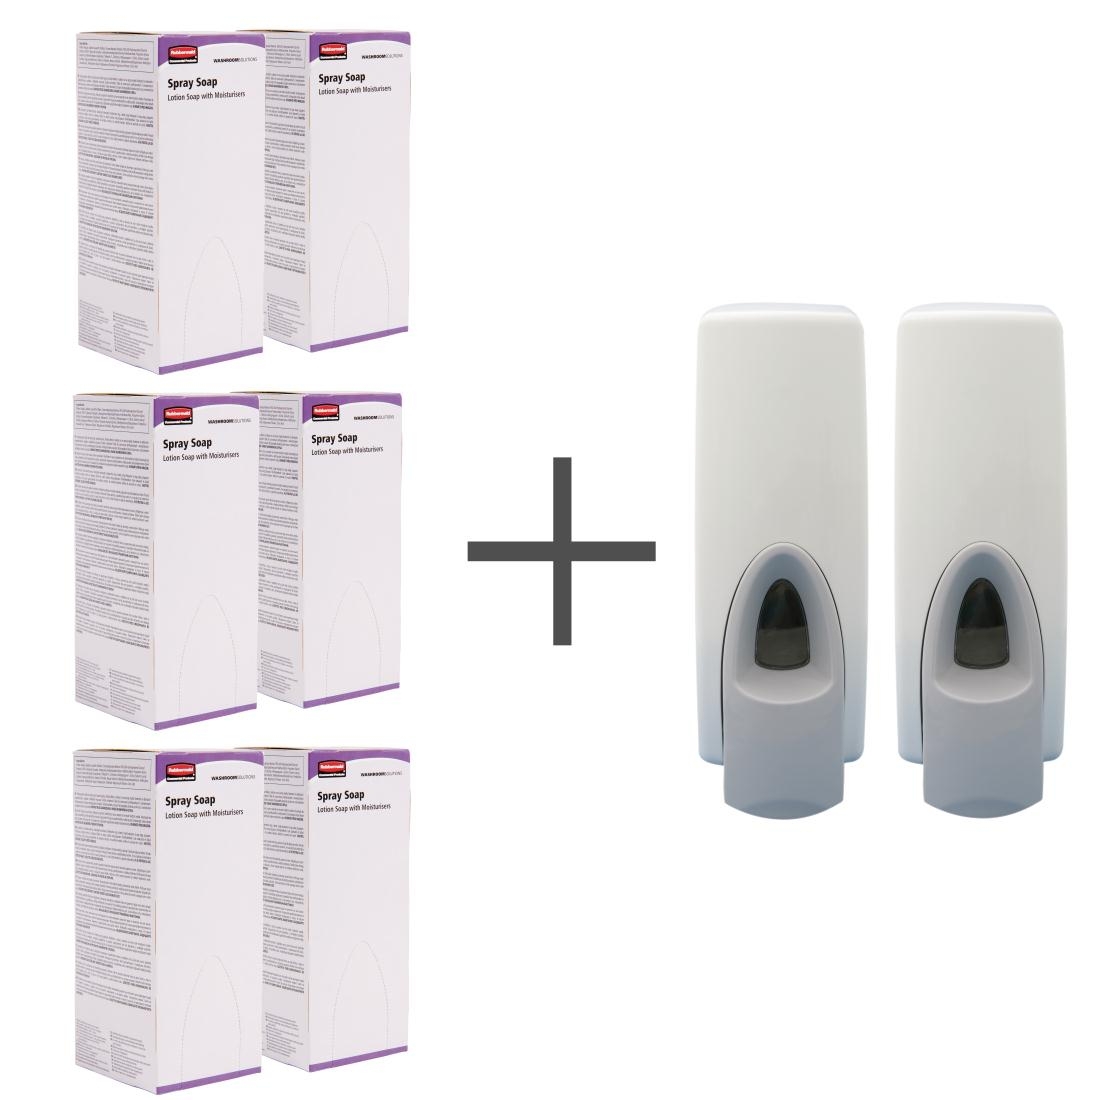 SALE OFFER 6 Rubbermaid Lotion Spray Soaps and 2 FREE Dispensers